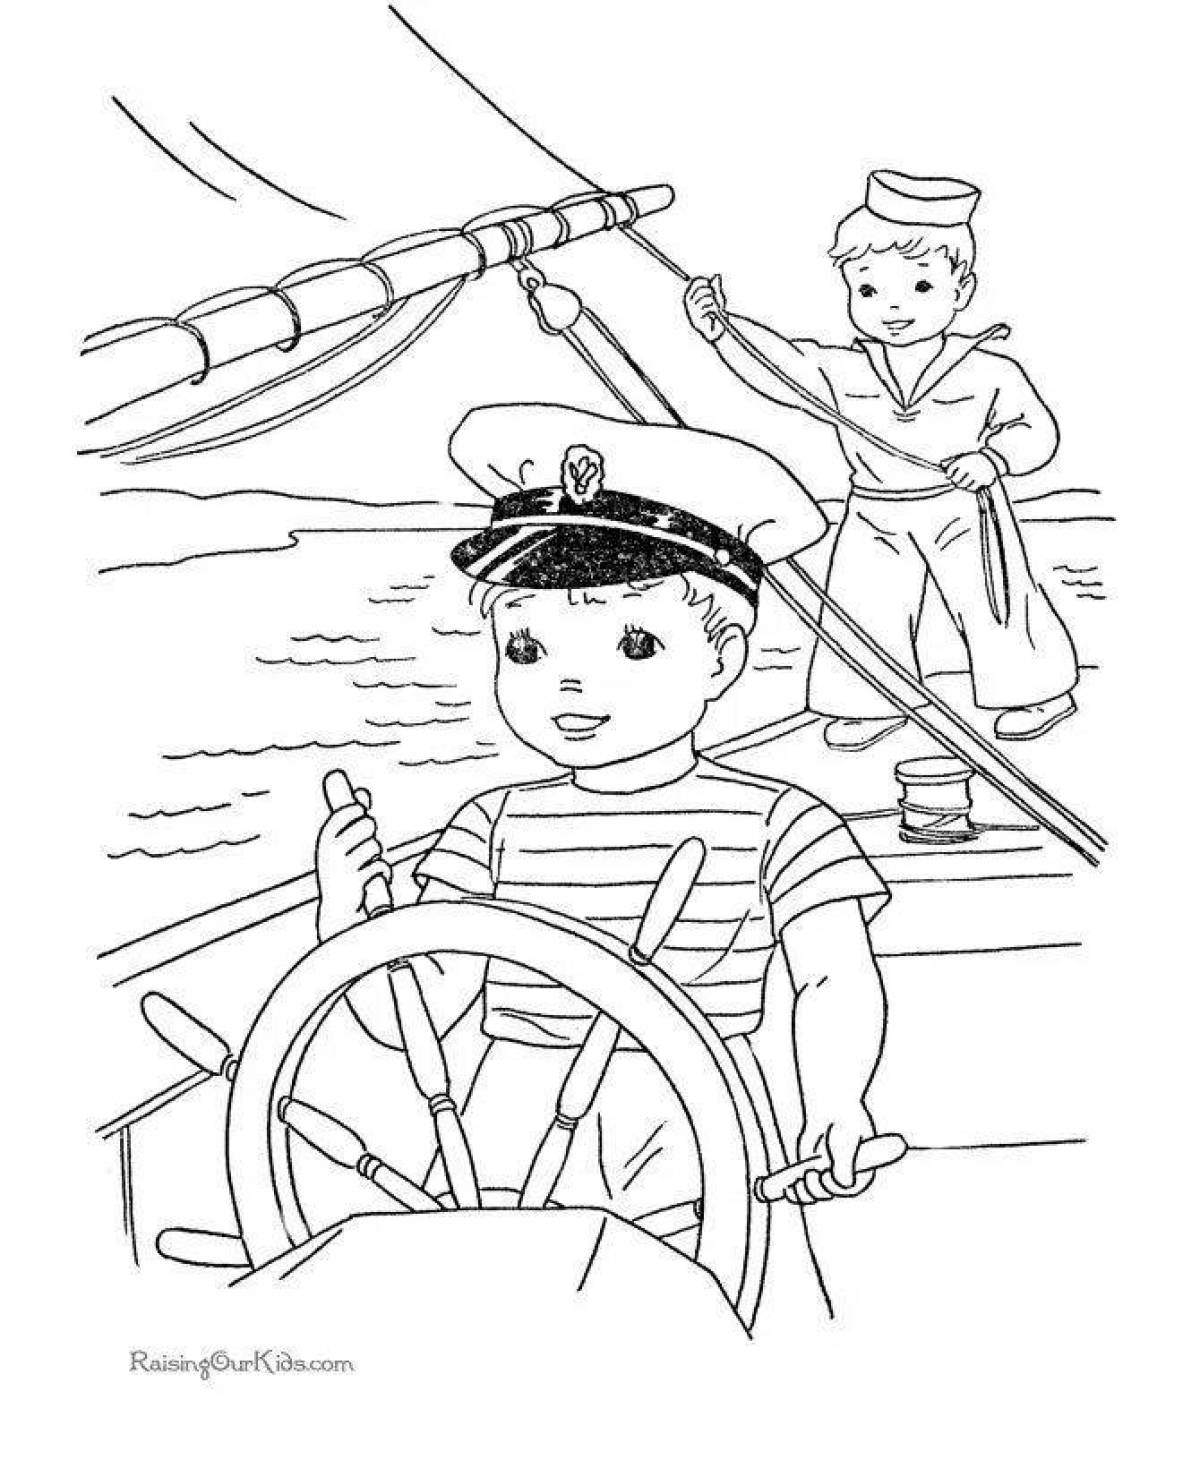 Brave sailor coloring pages for kids